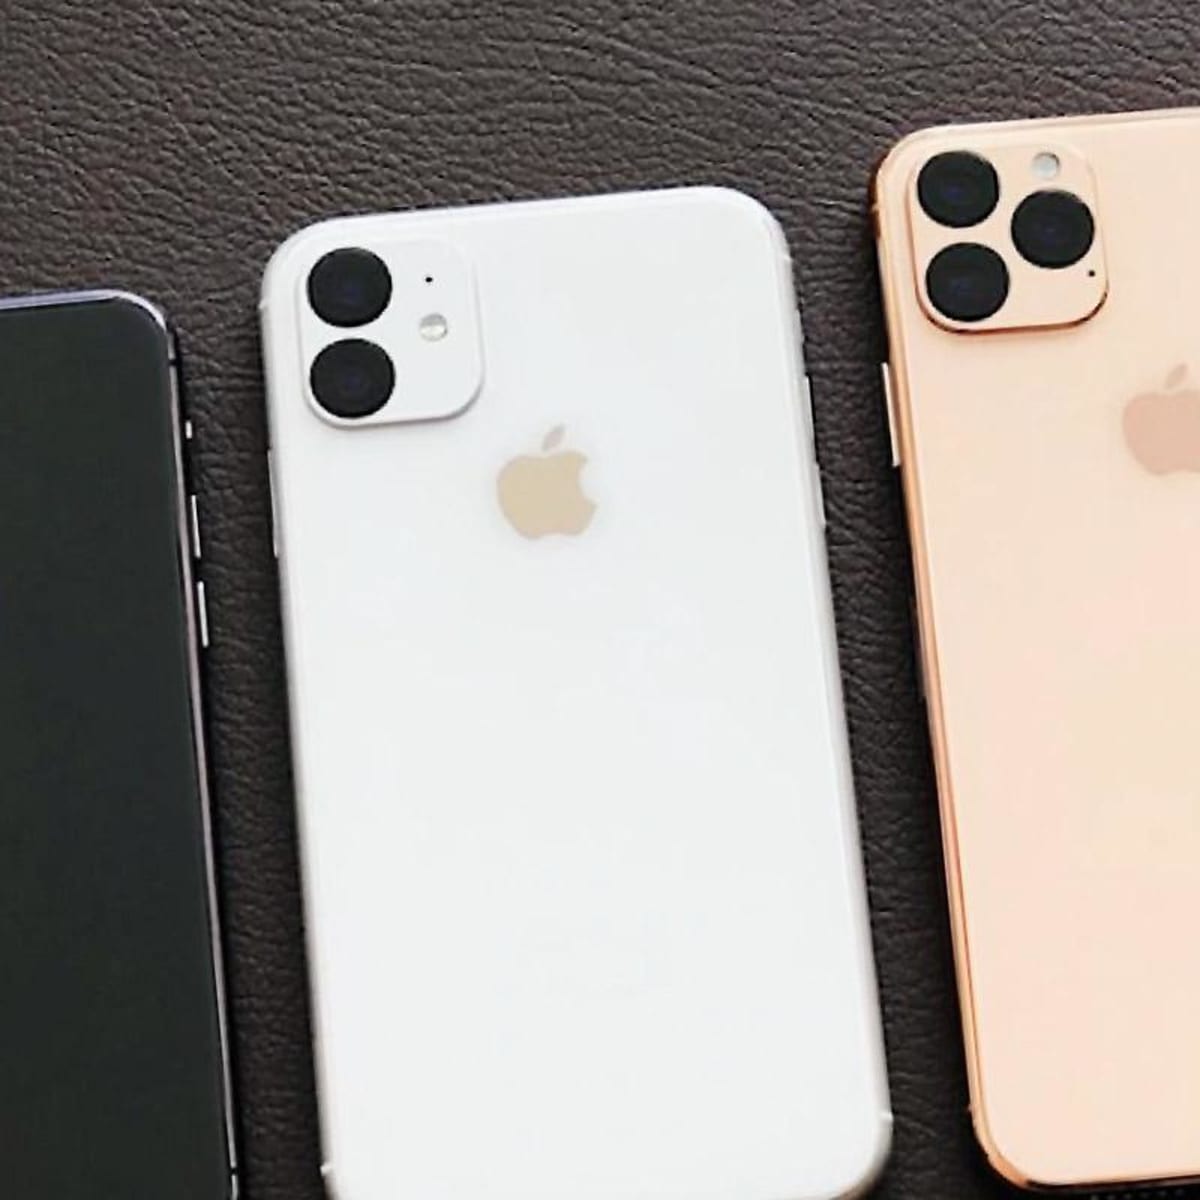 Buy The Phone, Wait On The Stock? Does The Iphone 11 Even Matter? -  Thestreet